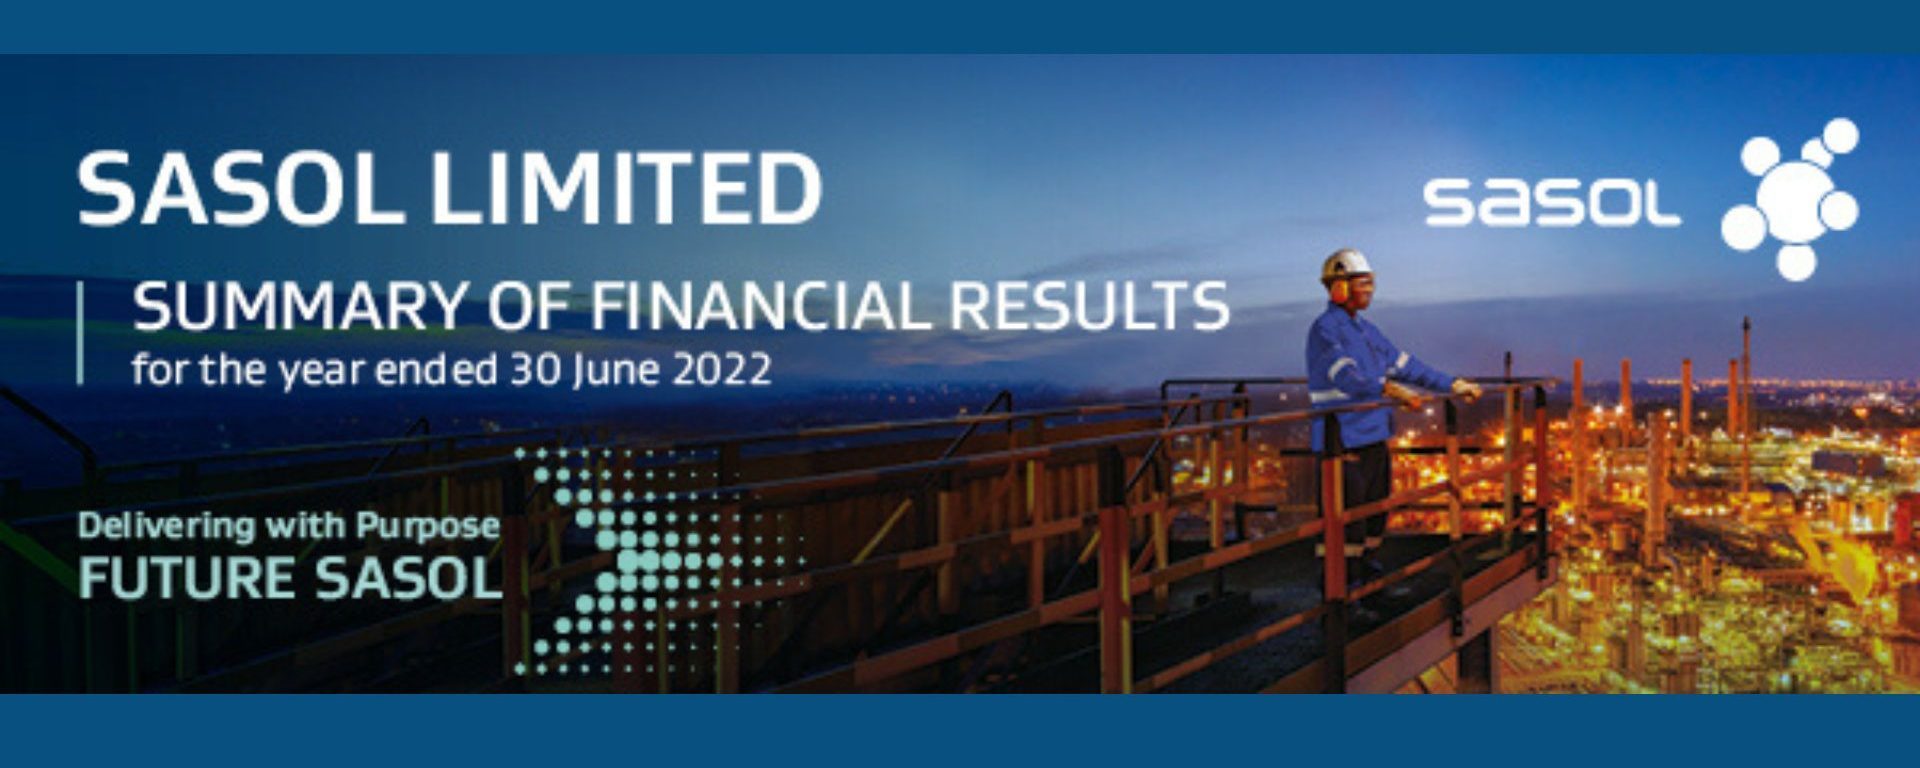 Sasol posts strong financial results, reinstates dividend